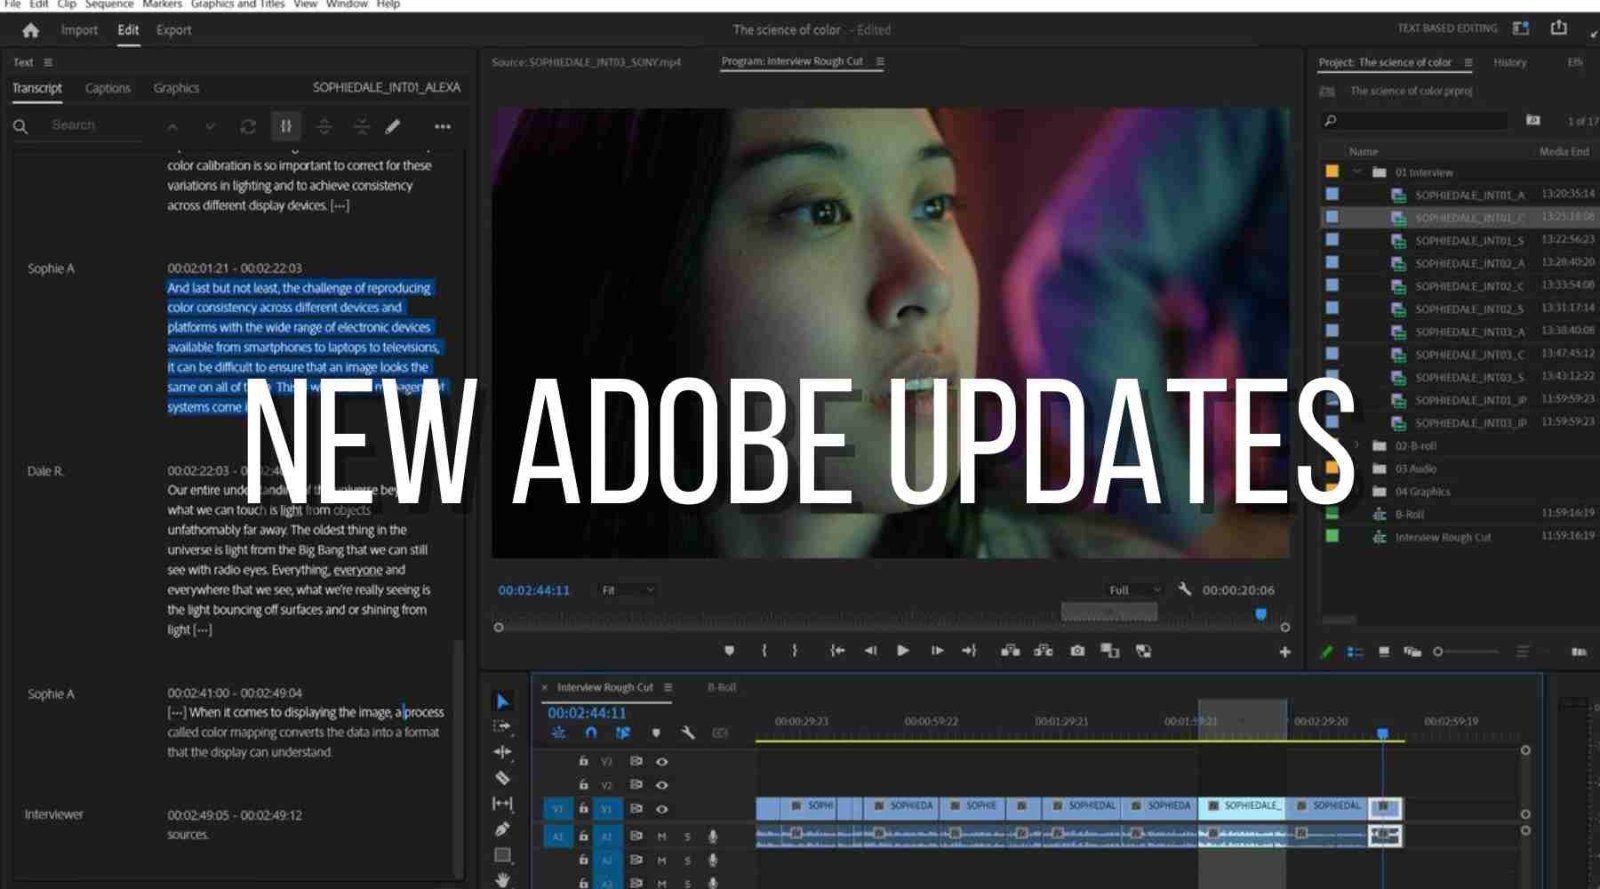 Adobe brings TEXT BASED EDITING to Premiere and other exciting updates. - Editors Keys